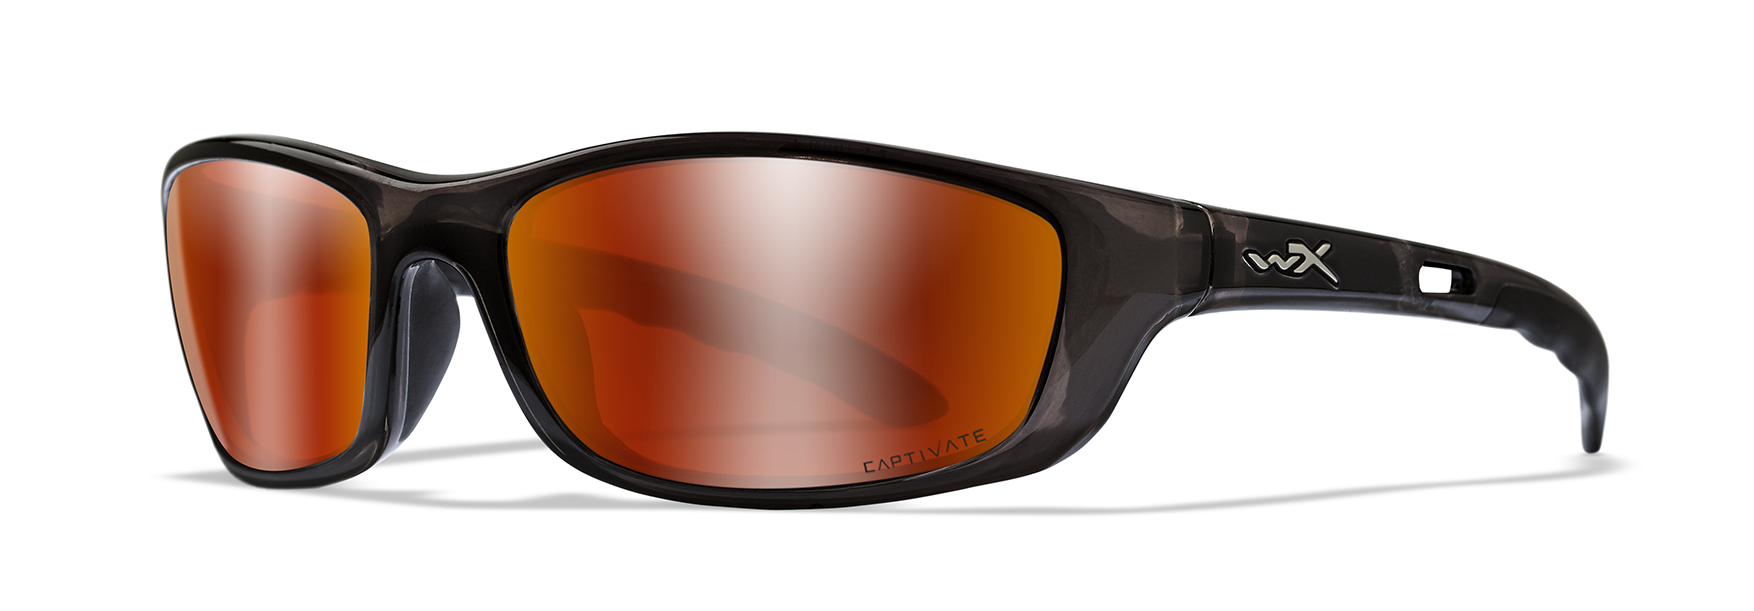 wiley x captivate polarized red mirror lenses in the p-17 sunglasses